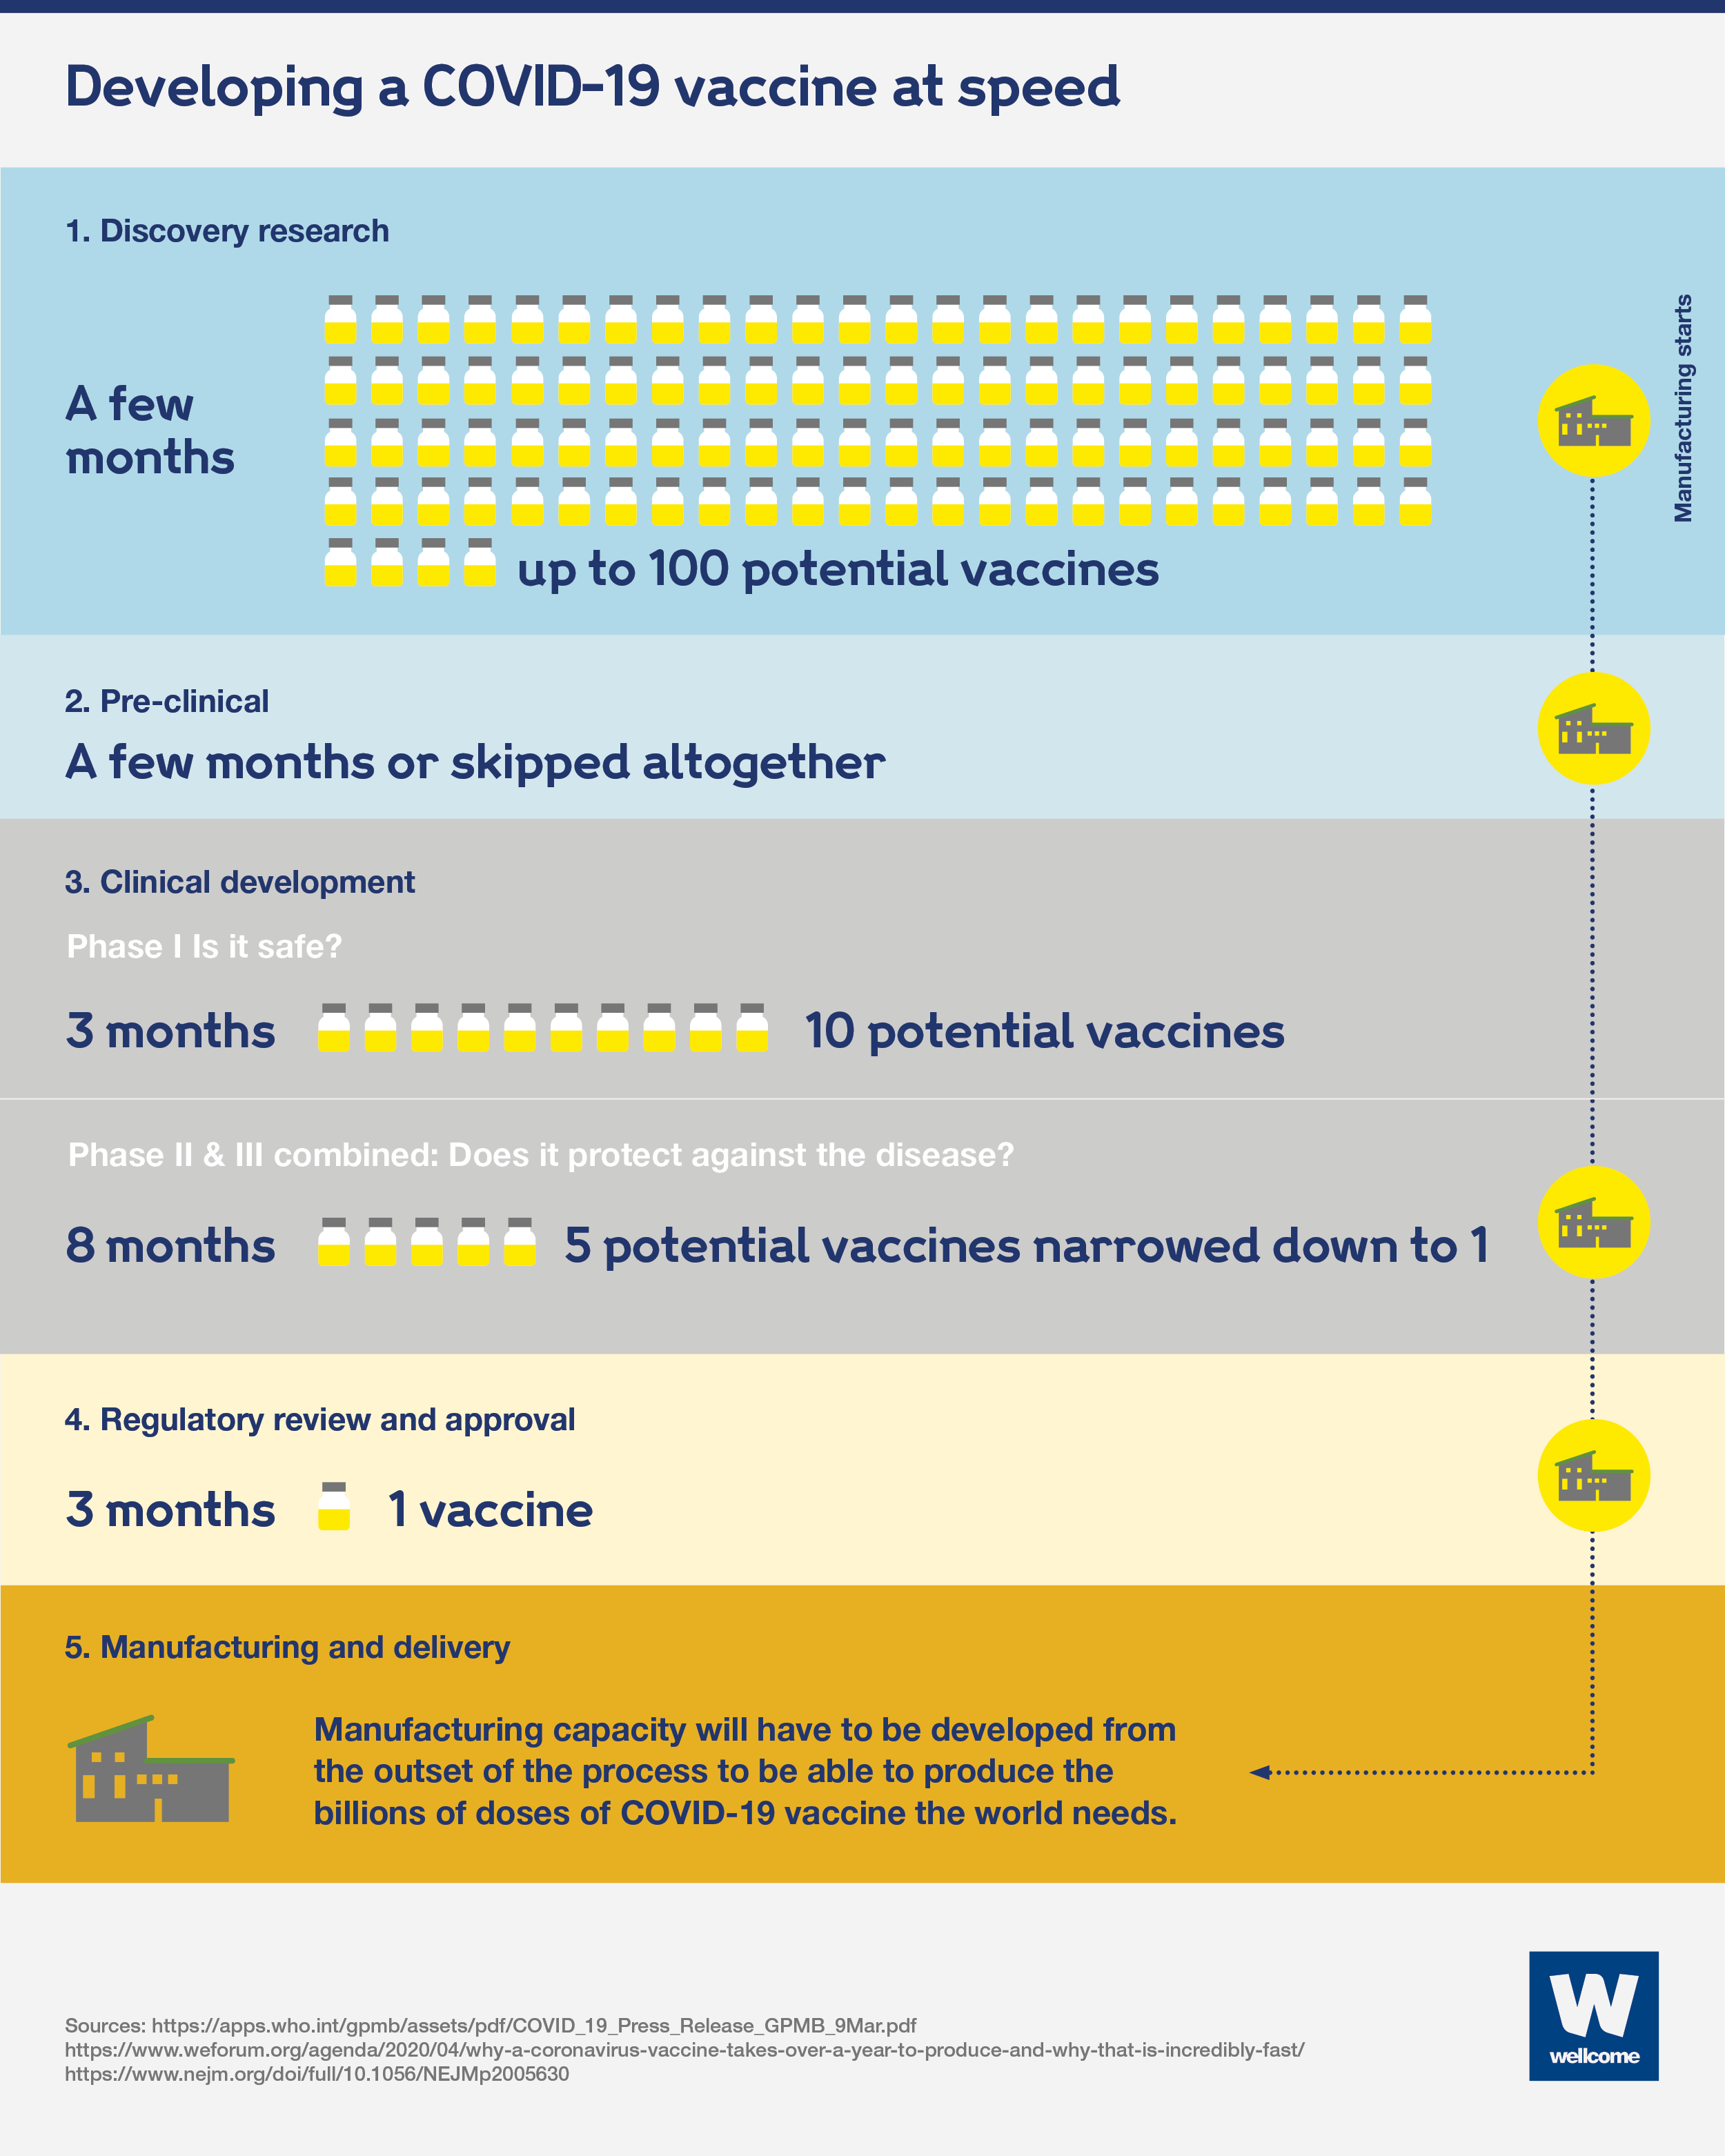 Graphic showing the five stages of developing a Covid-19 vaccine at speed.